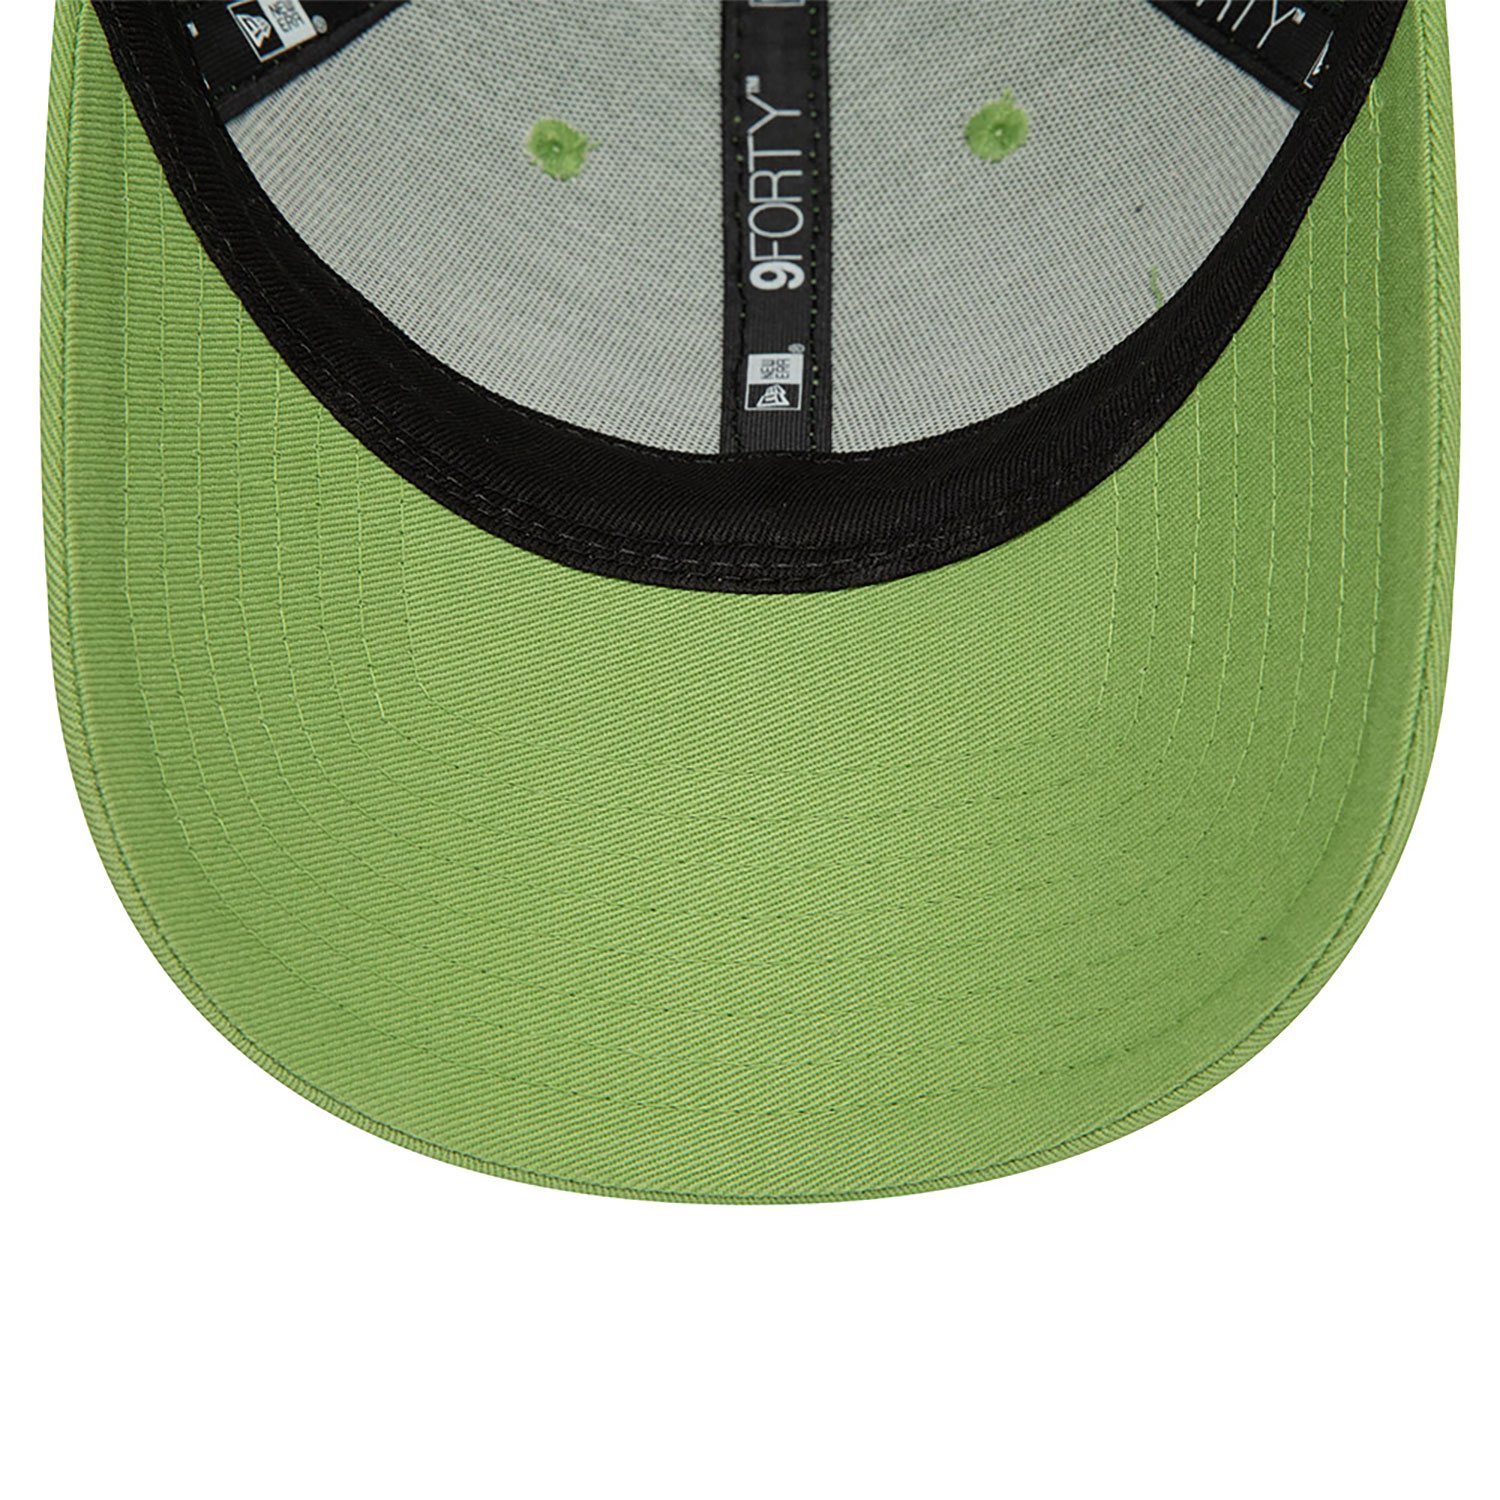 New York Yankees MLB Flawless Green 9FORTY Adjustable Cap